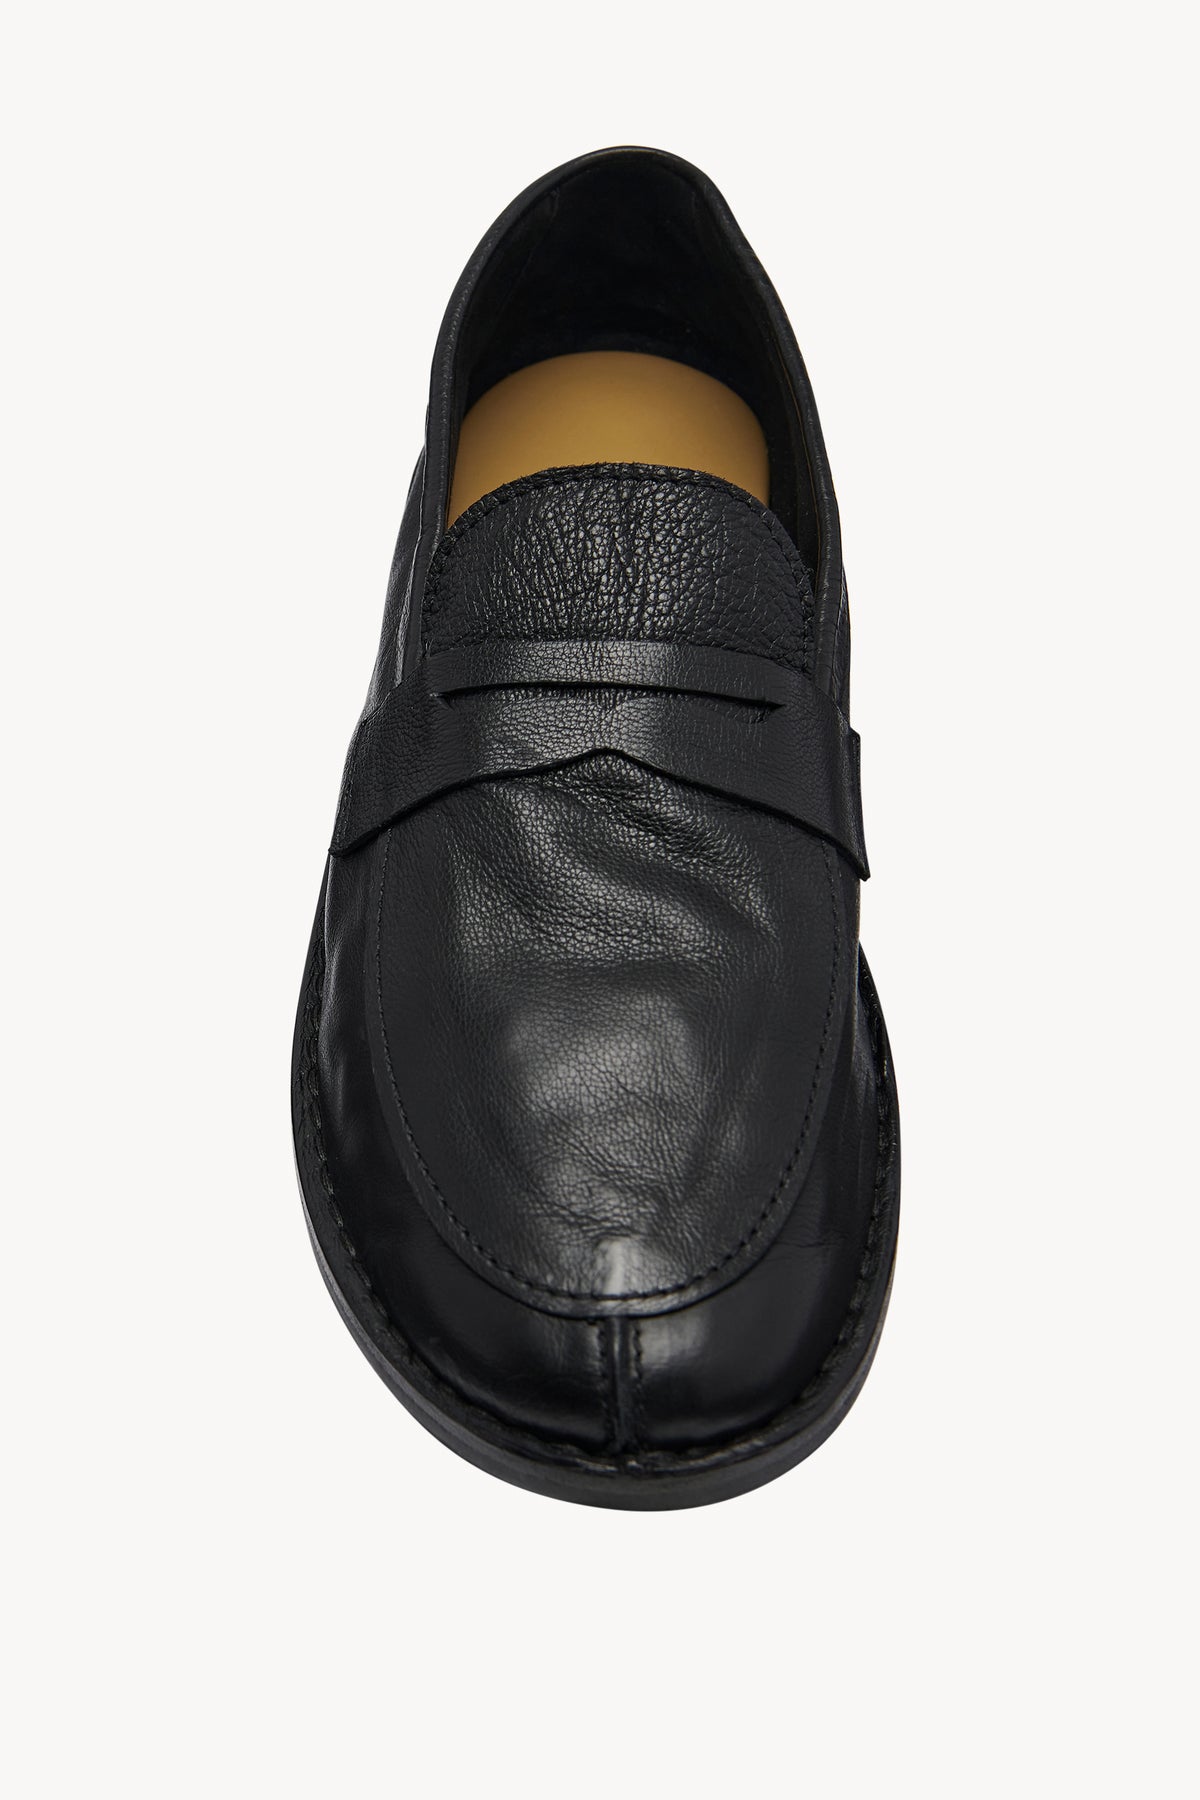 Cary Loafer in Leather